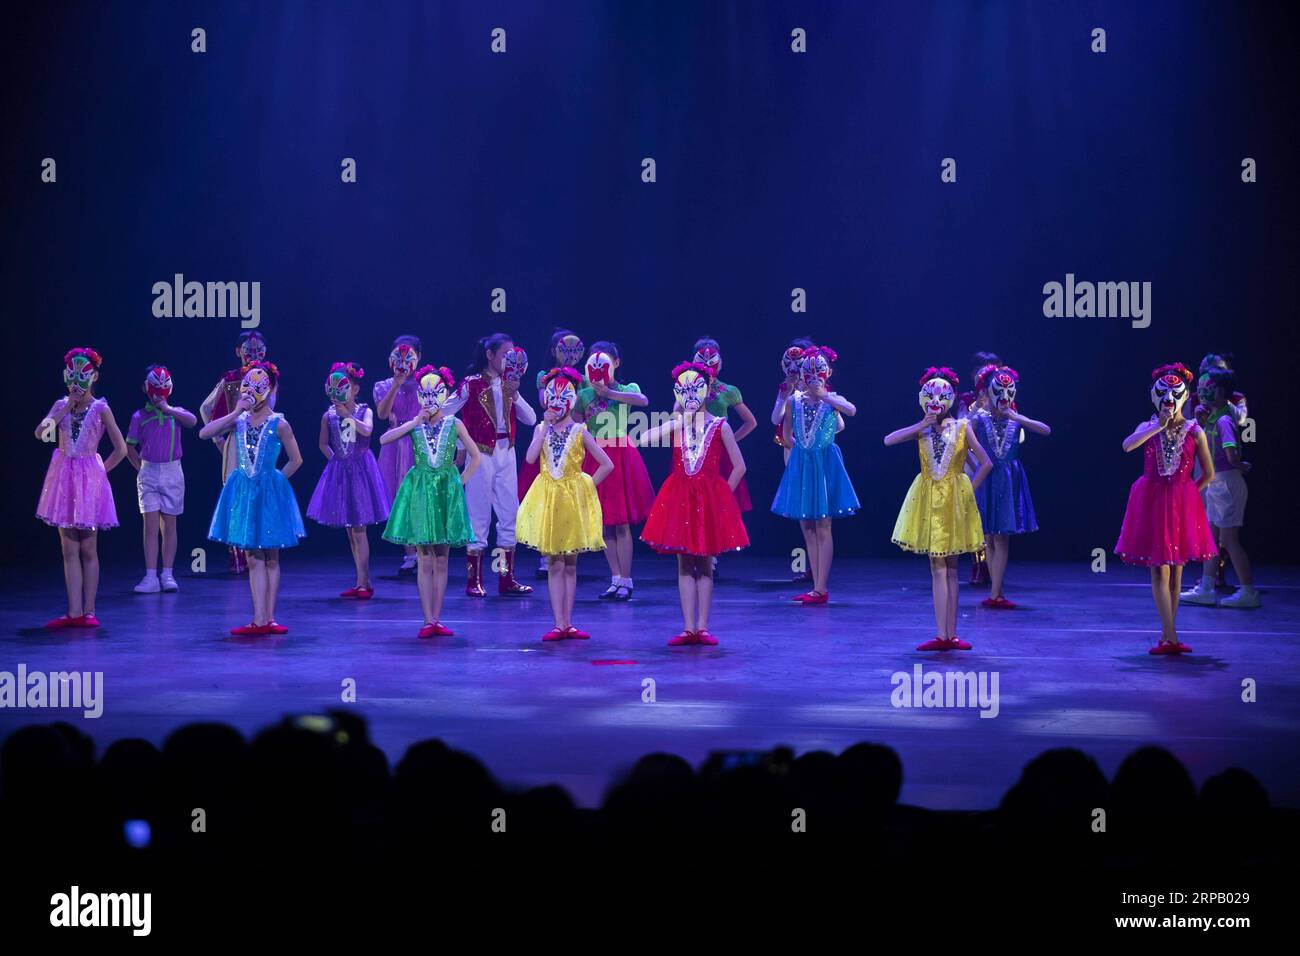 (190523) -- HELSINKI, May 23, 2019 (Xinhua) -- Children from the Nanjing Little Red Flower Art Troupe of China perform at the Alexander Theatre in Helsinki, Finland, May 21, 2019. (Xinhua/Matti Matikainen) FINLAND-HELSINKI-ART TROUPE-PERFORMANCE PUBLICATIONxNOTxINxCHN Stock Photo